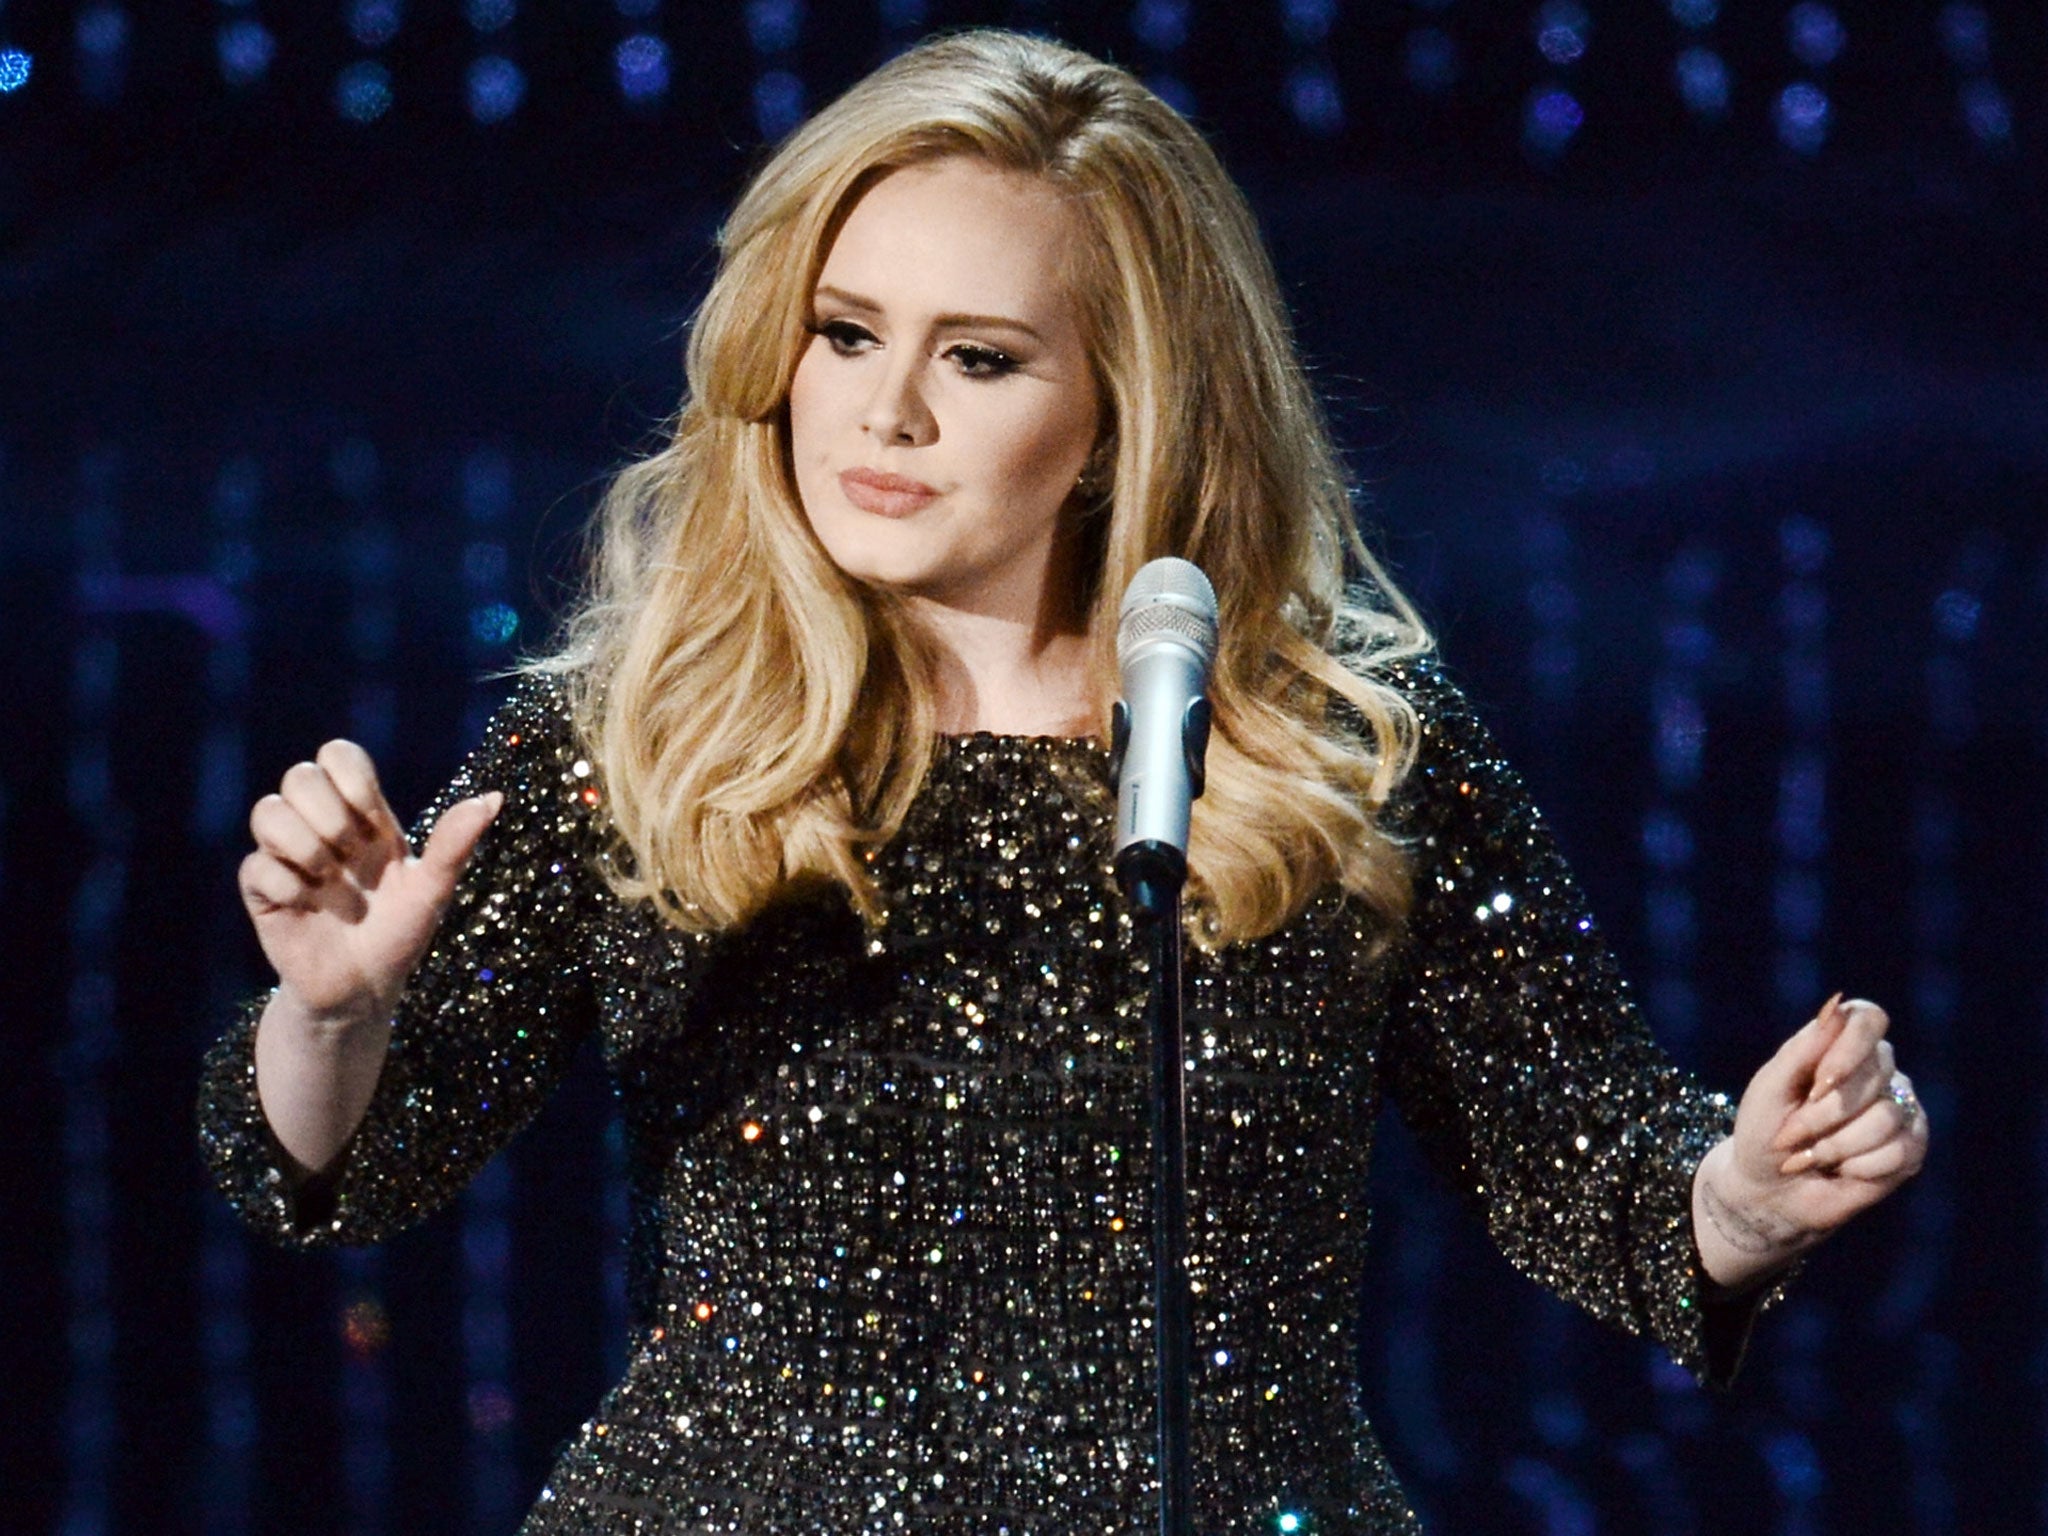 Adele hints third album 25 will be released by end of 2014 | News ...